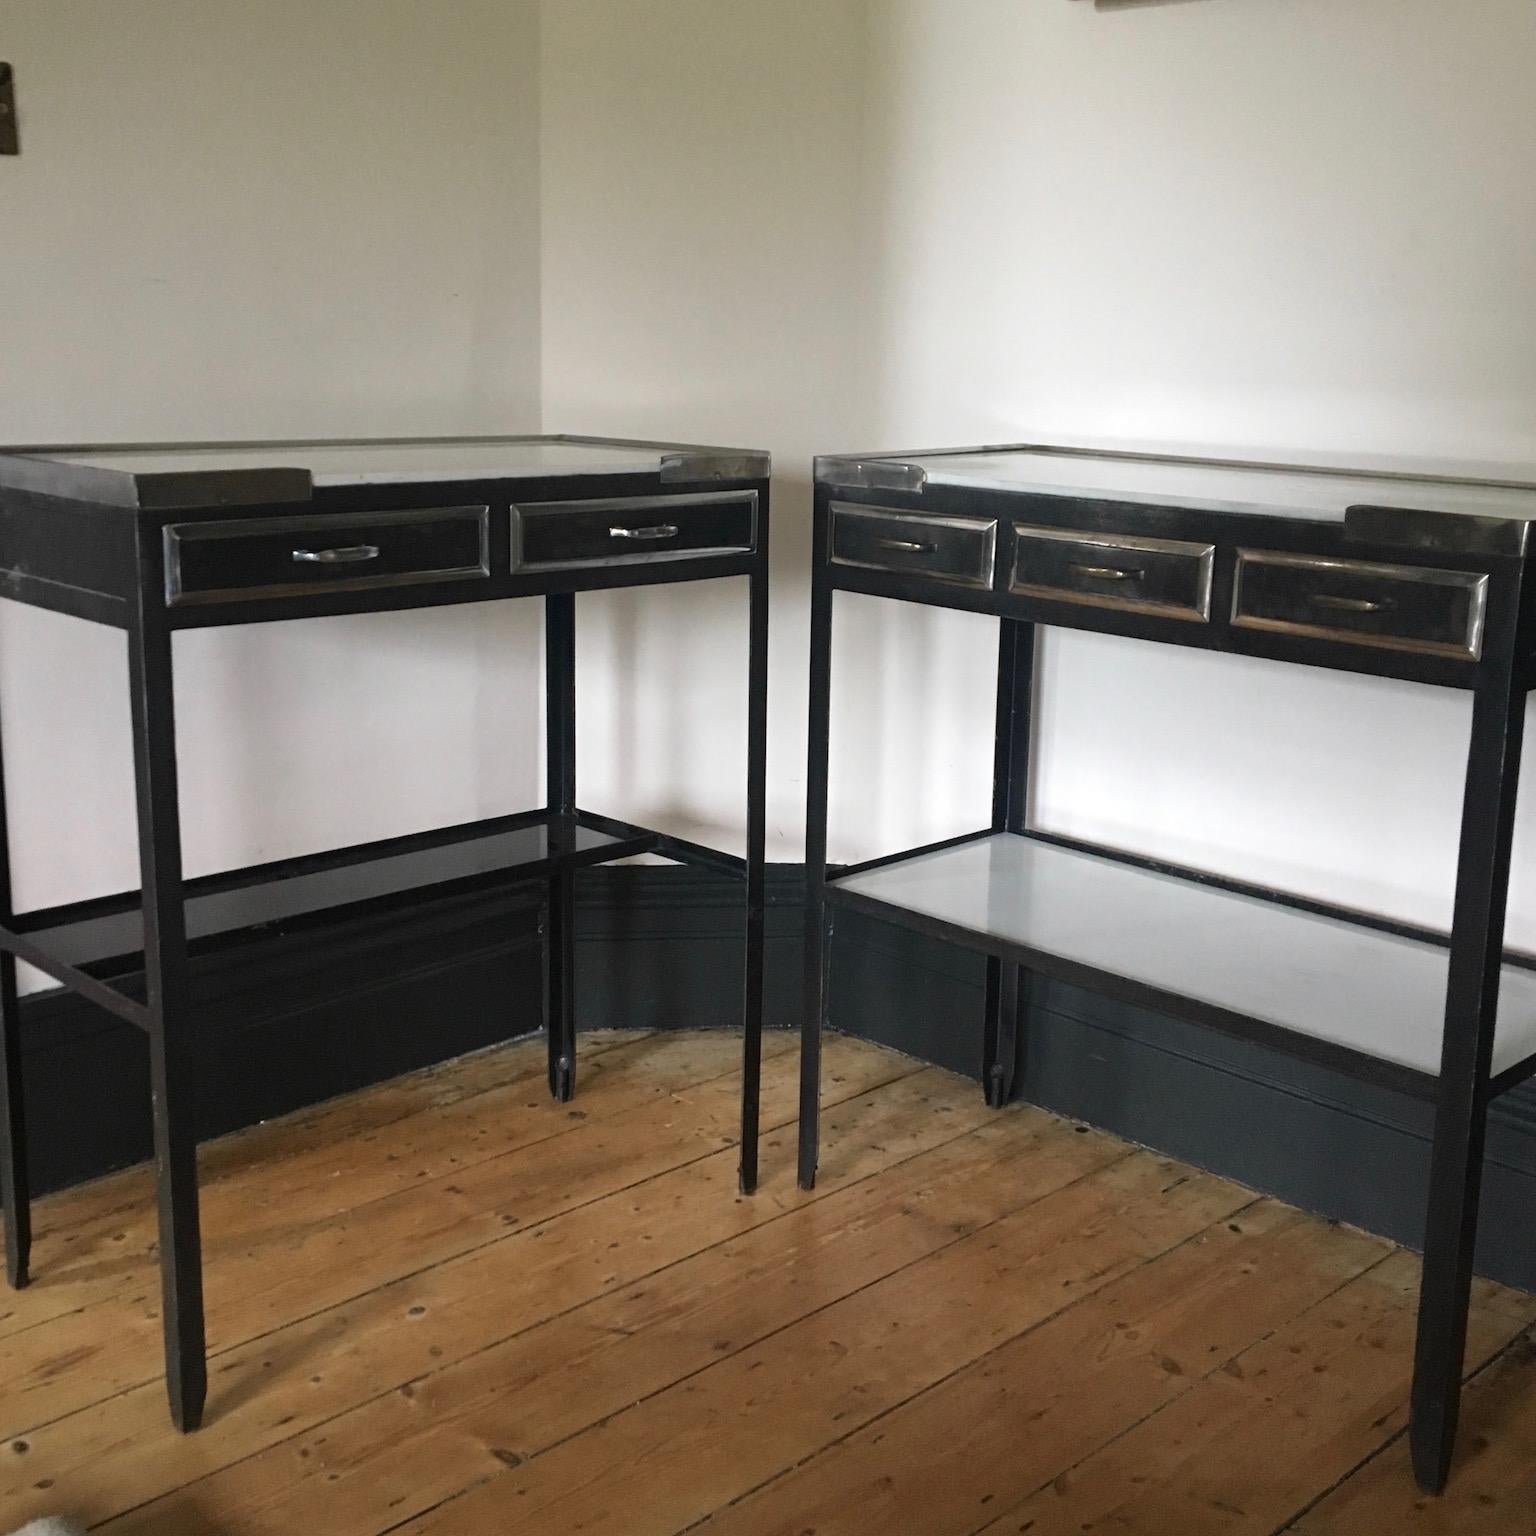 We have two of these very stylish medical tables with either two or three drawers. They are great as a pair even though there are differences in size. Very striking in a bathroom, as a console or bedside tables. The one listed here has two glass